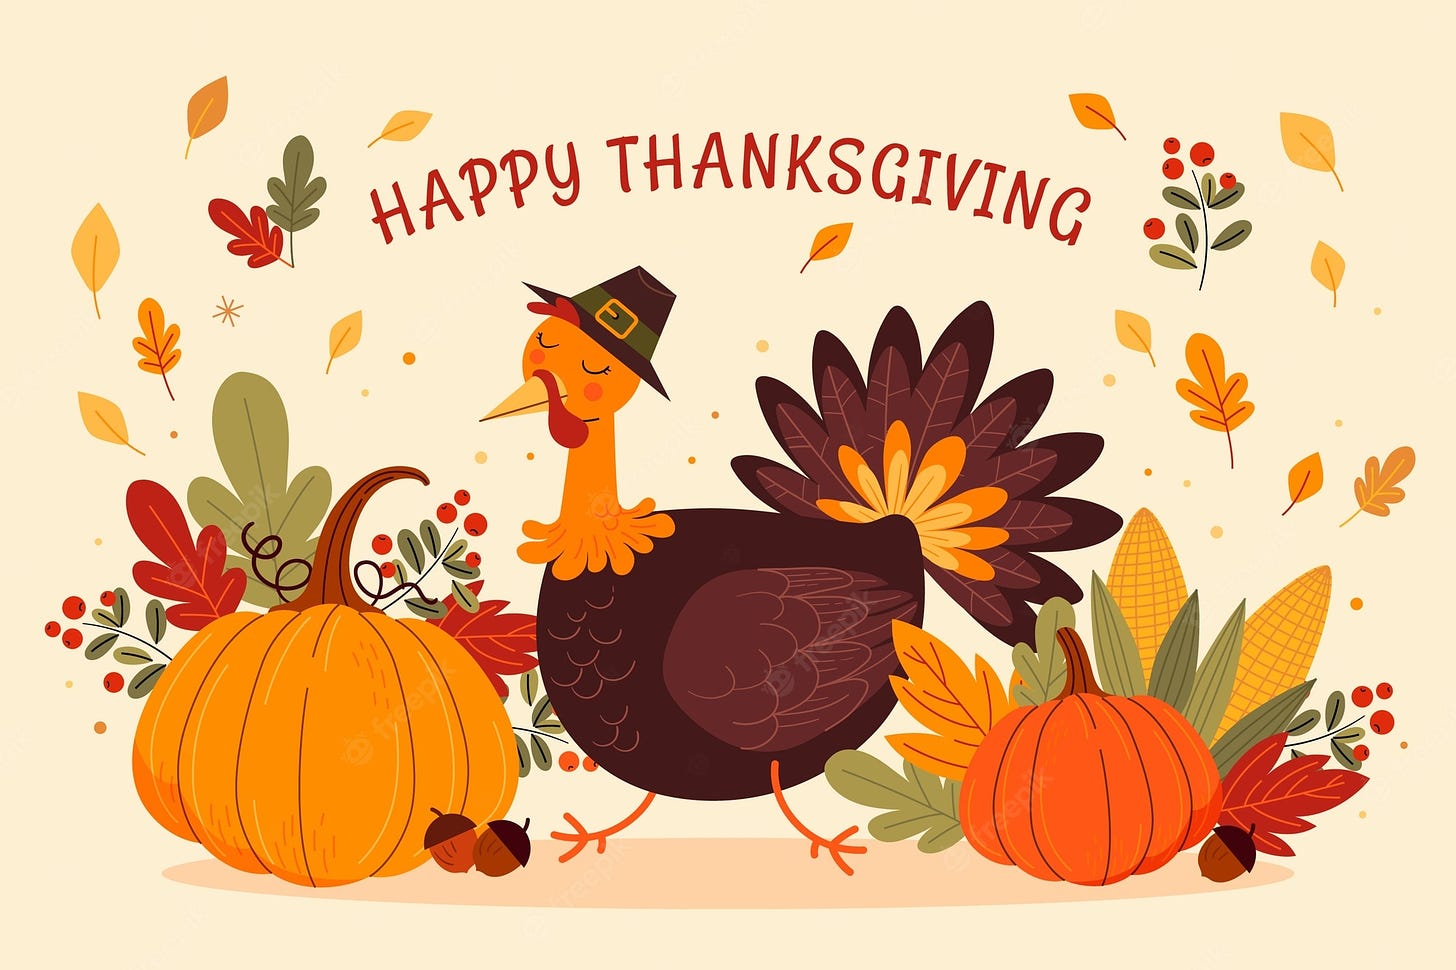 Happy thanksgiving background Images | Free Vectors, Stock Photos & PSD